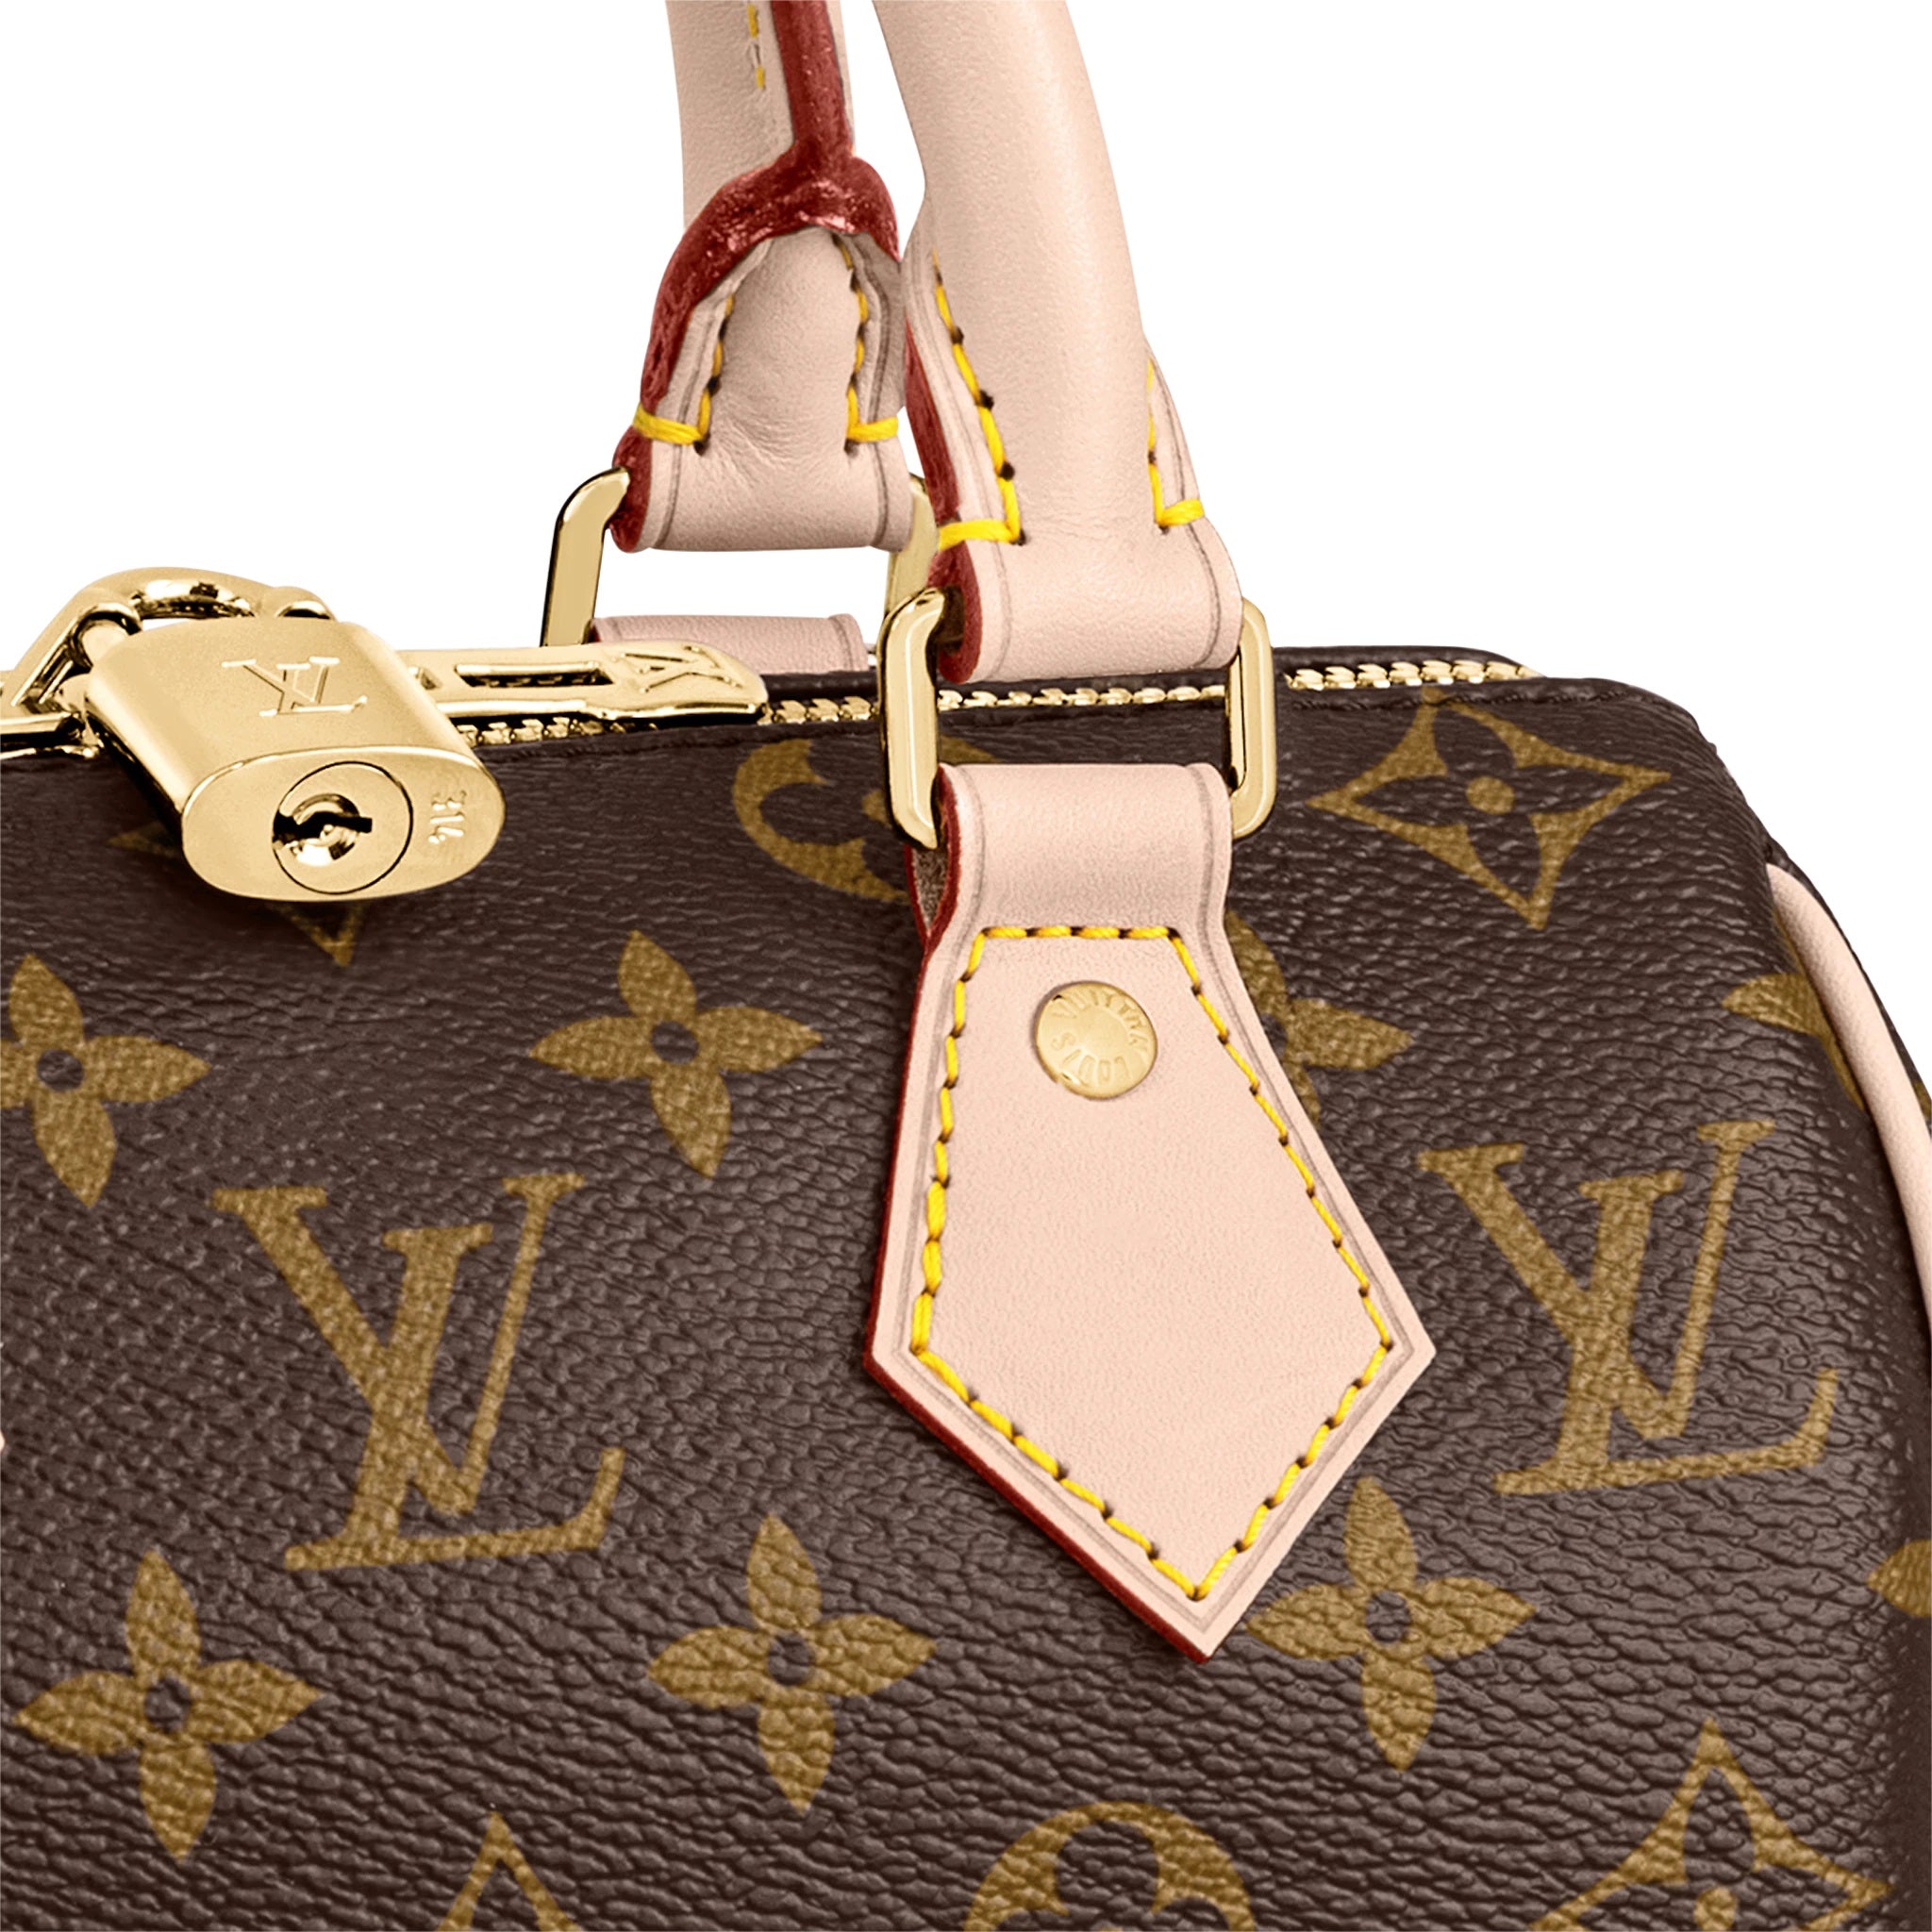 NEW LOUIS VUITTON SPEEDY 20 BANDOULIERE 2021! FIRST IMPRESSIONS, WHAT'S IN  MY DESIGNER BAG? 